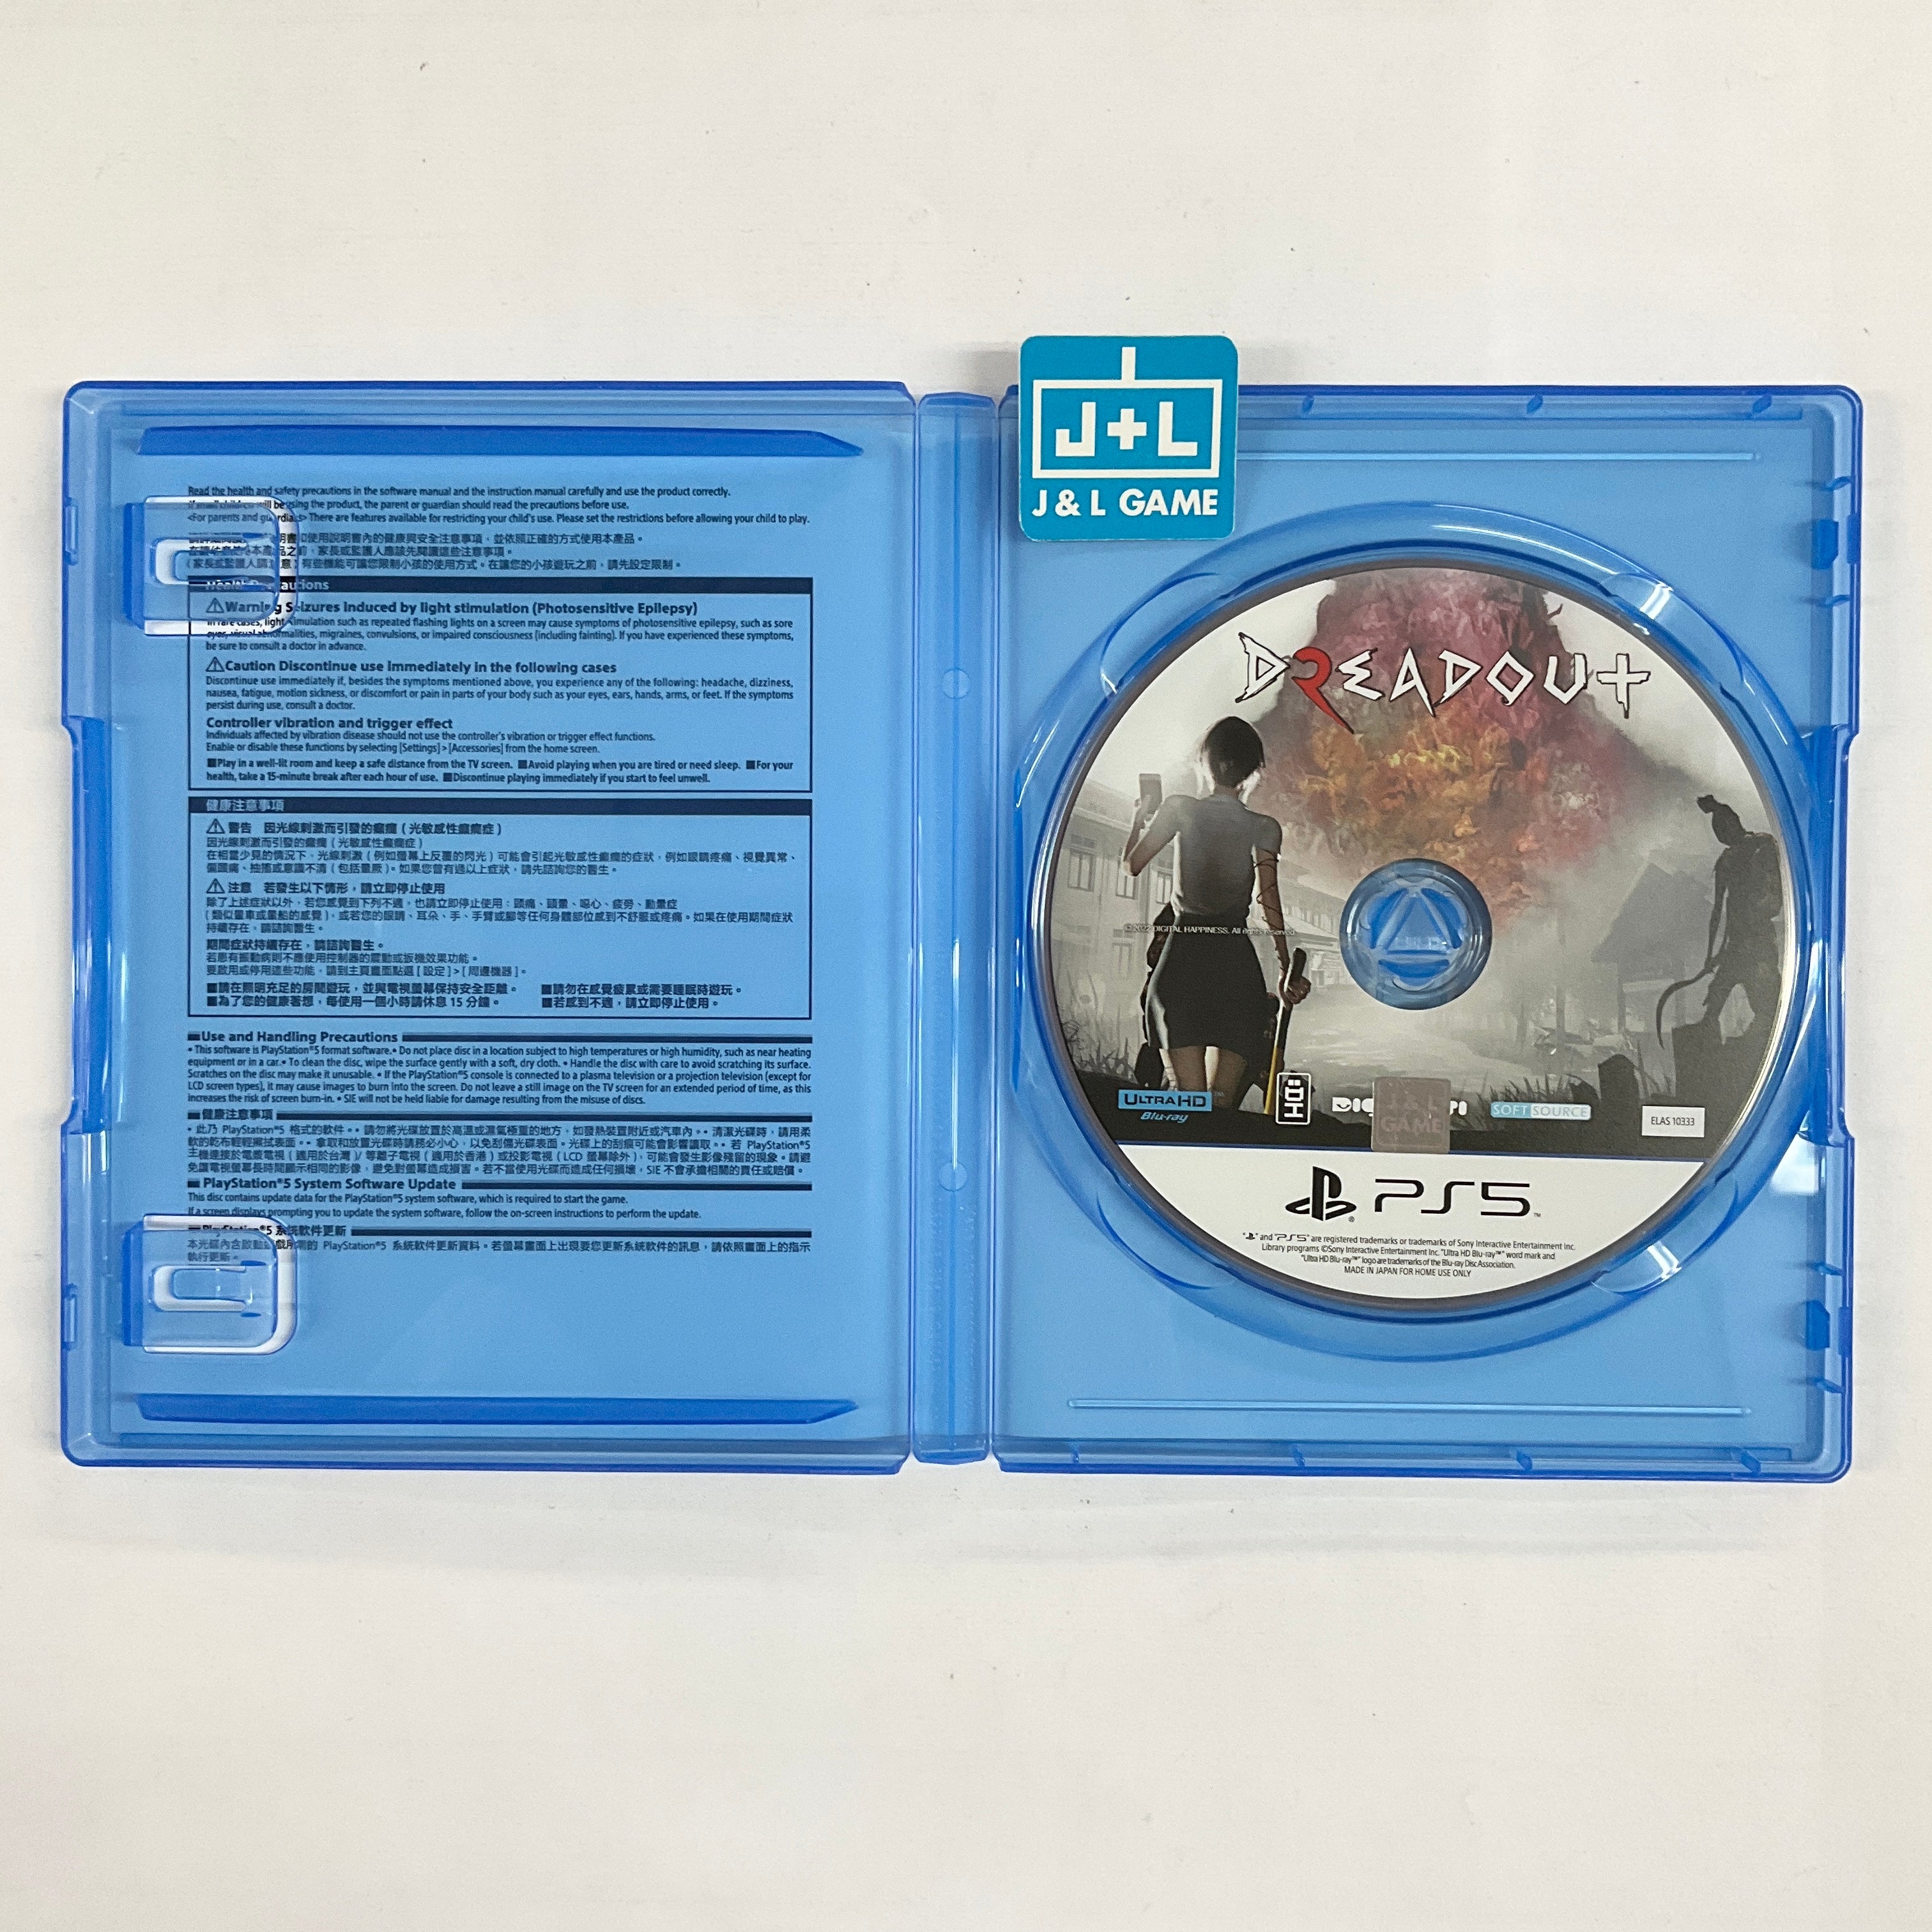 DreadOut 2 - (PS5) Playstation 5 [Pre-Owned] (Asia Import) Video Games SOFTSOURCE   